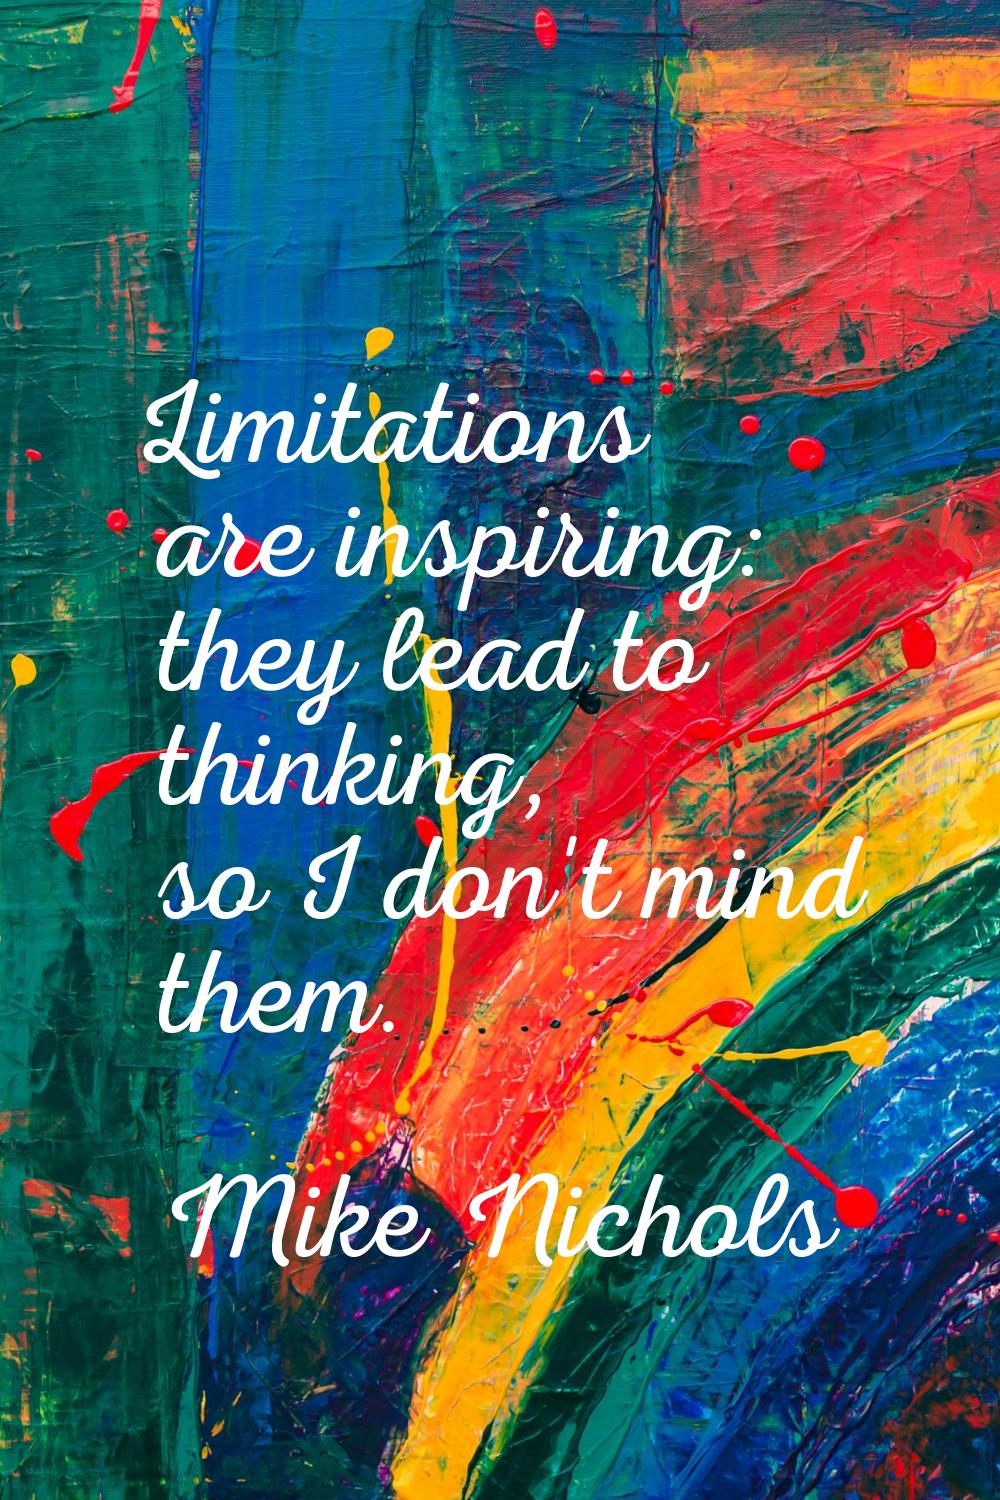 Limitations are inspiring: they lead to thinking, so I don't mind them.